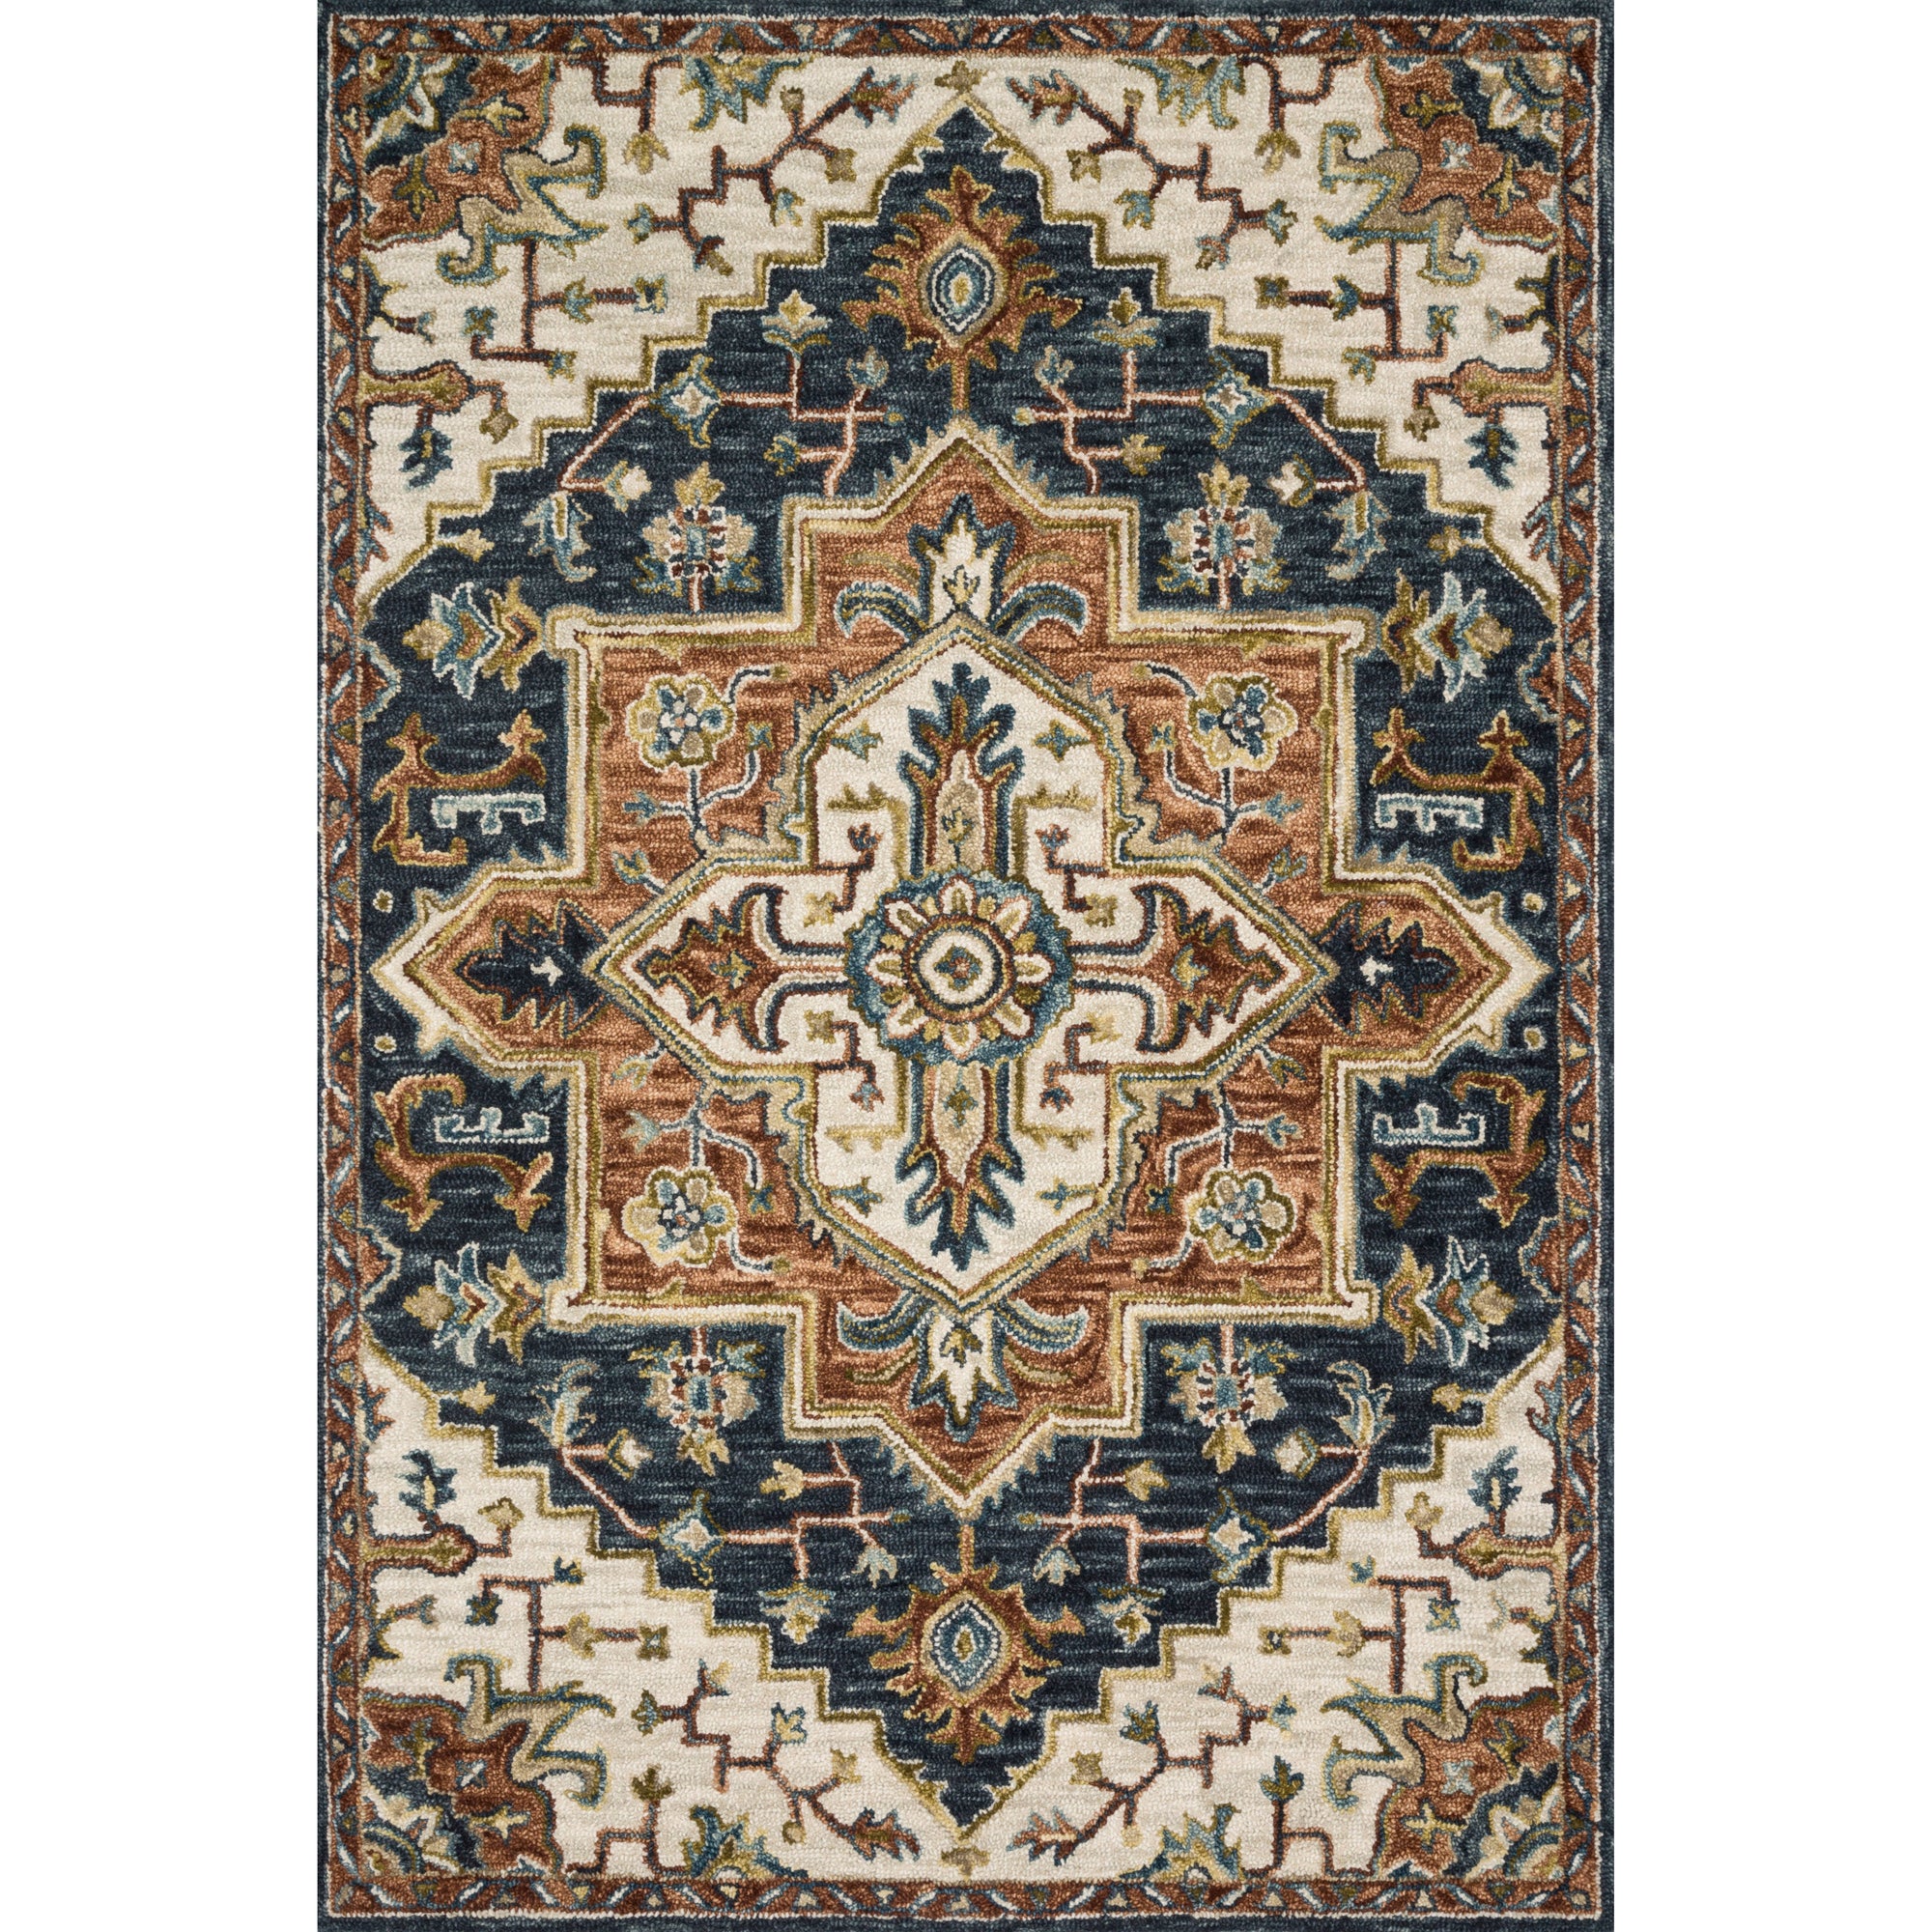 Rugs by Roo Loloi Victoria Blue Multi Area Rug in size 18" x 18" Sample